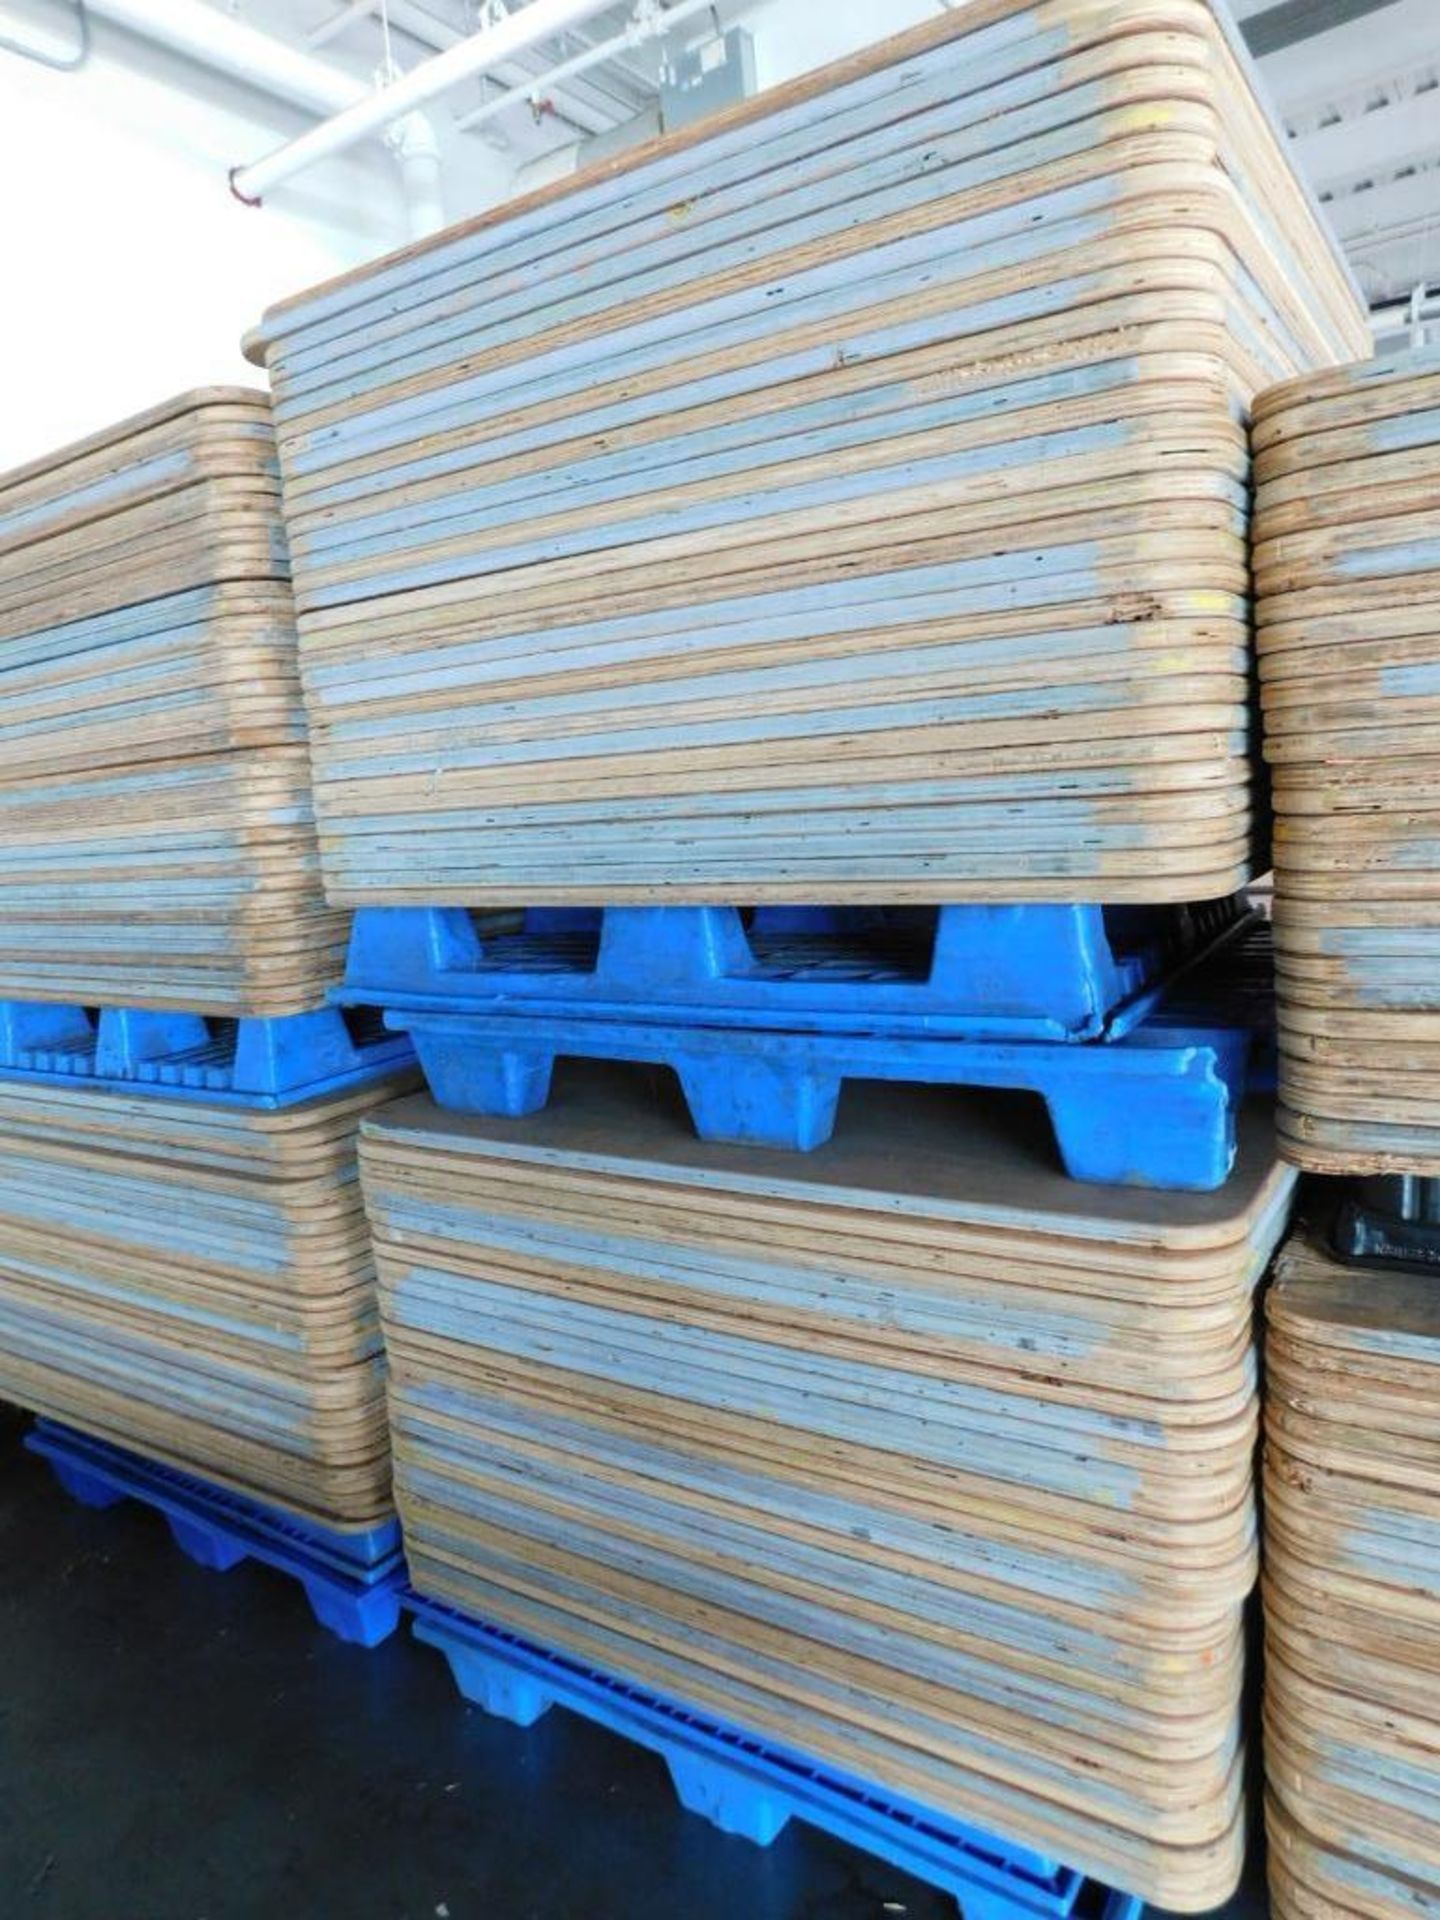 LOT: Large Quantity of 50" x 50" Wood Paper Roll Pallets on (12) Plastic Pallets (LOCATION: IN MAIL - Image 6 of 7